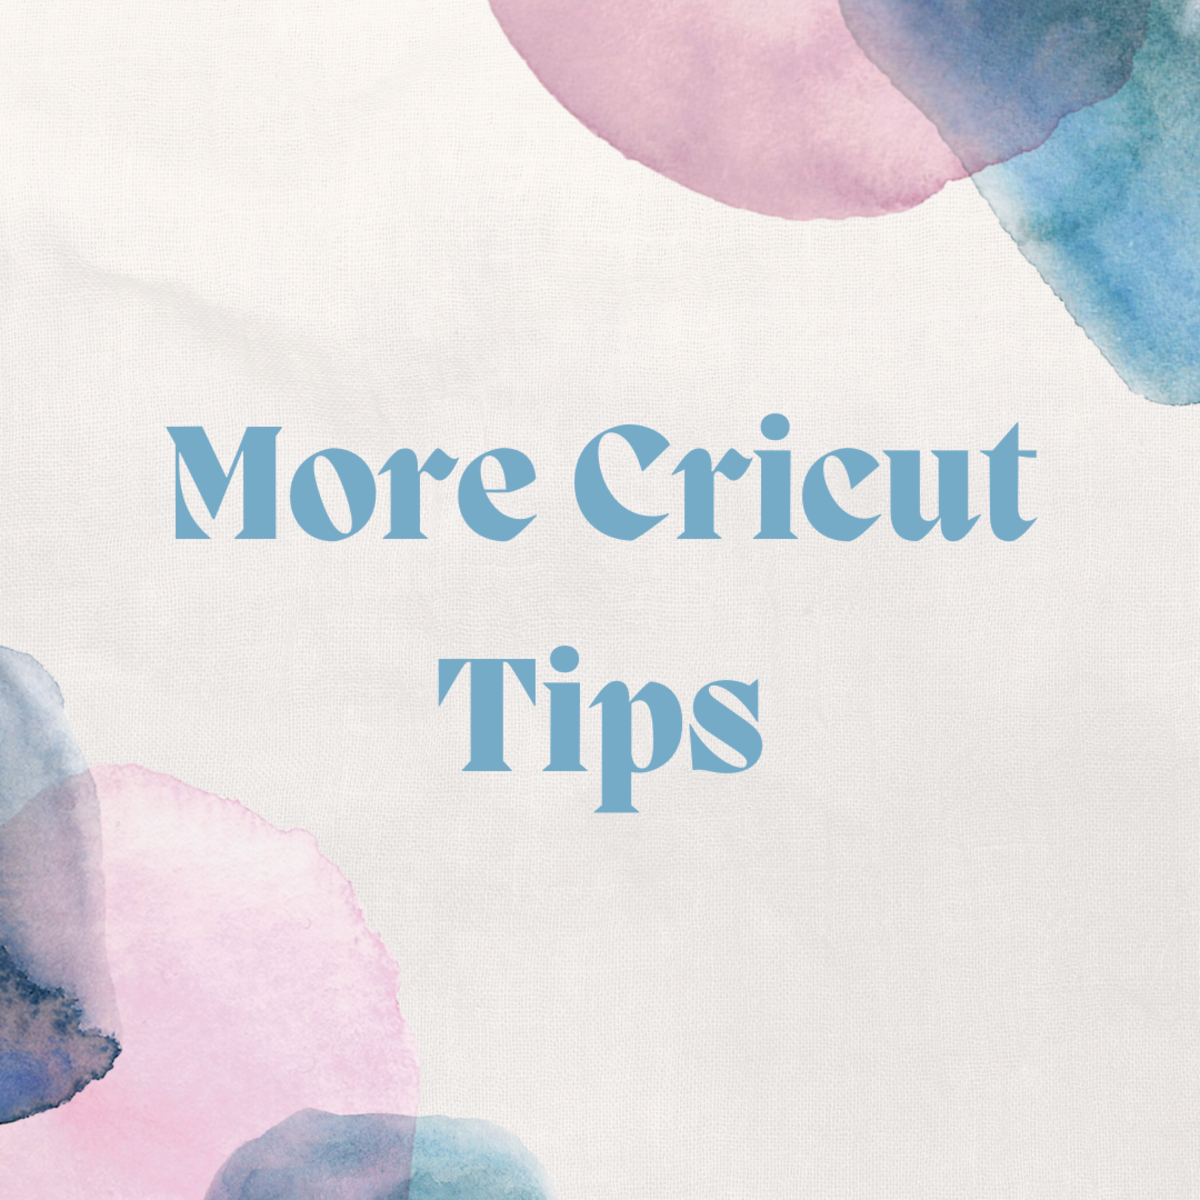 More ideas to help you get the best experiences from your Cricut cutting machine